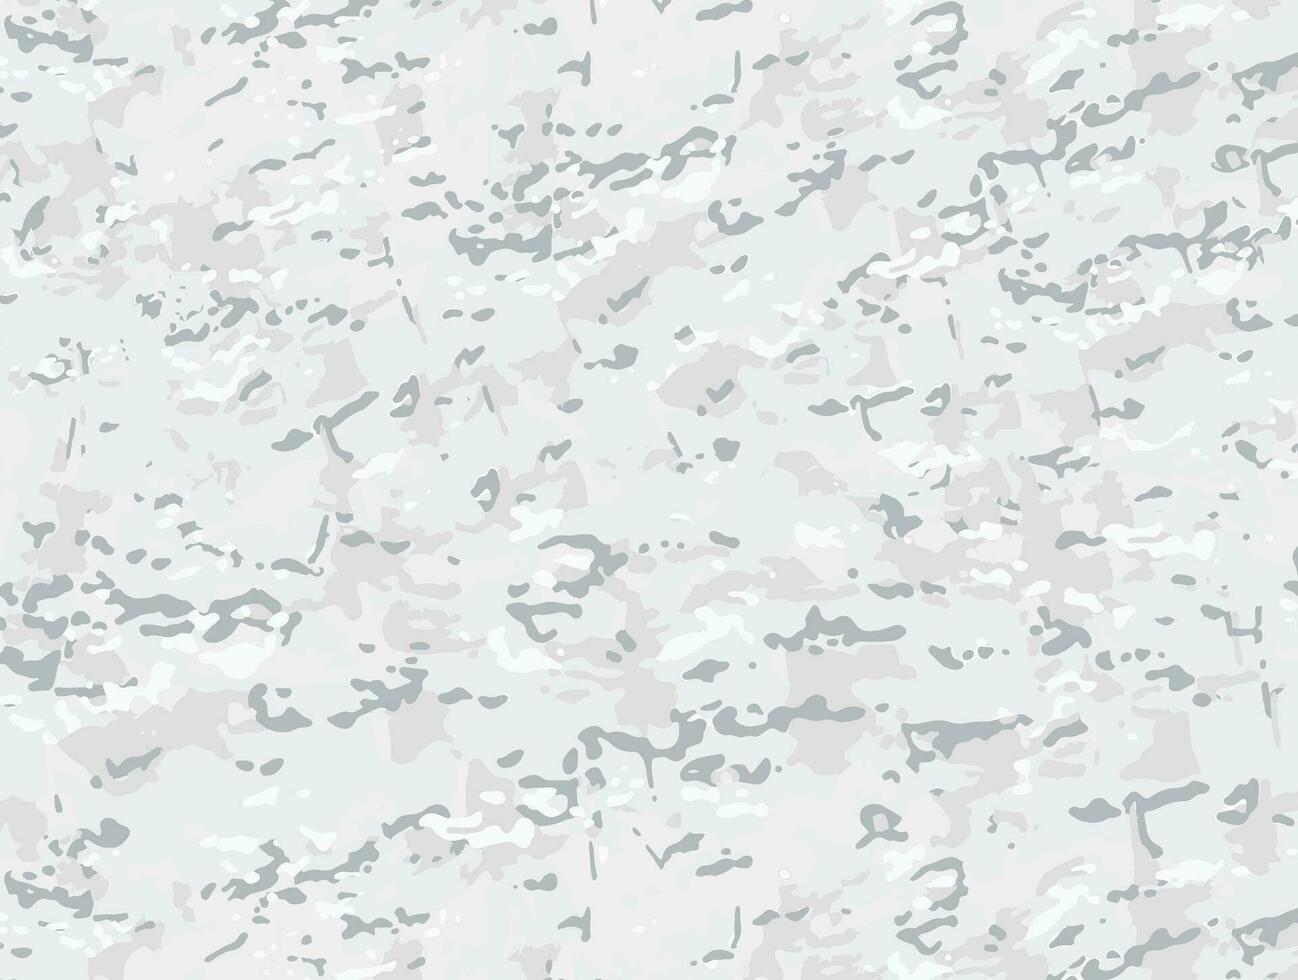 Snow multicam camouflage pattern vector